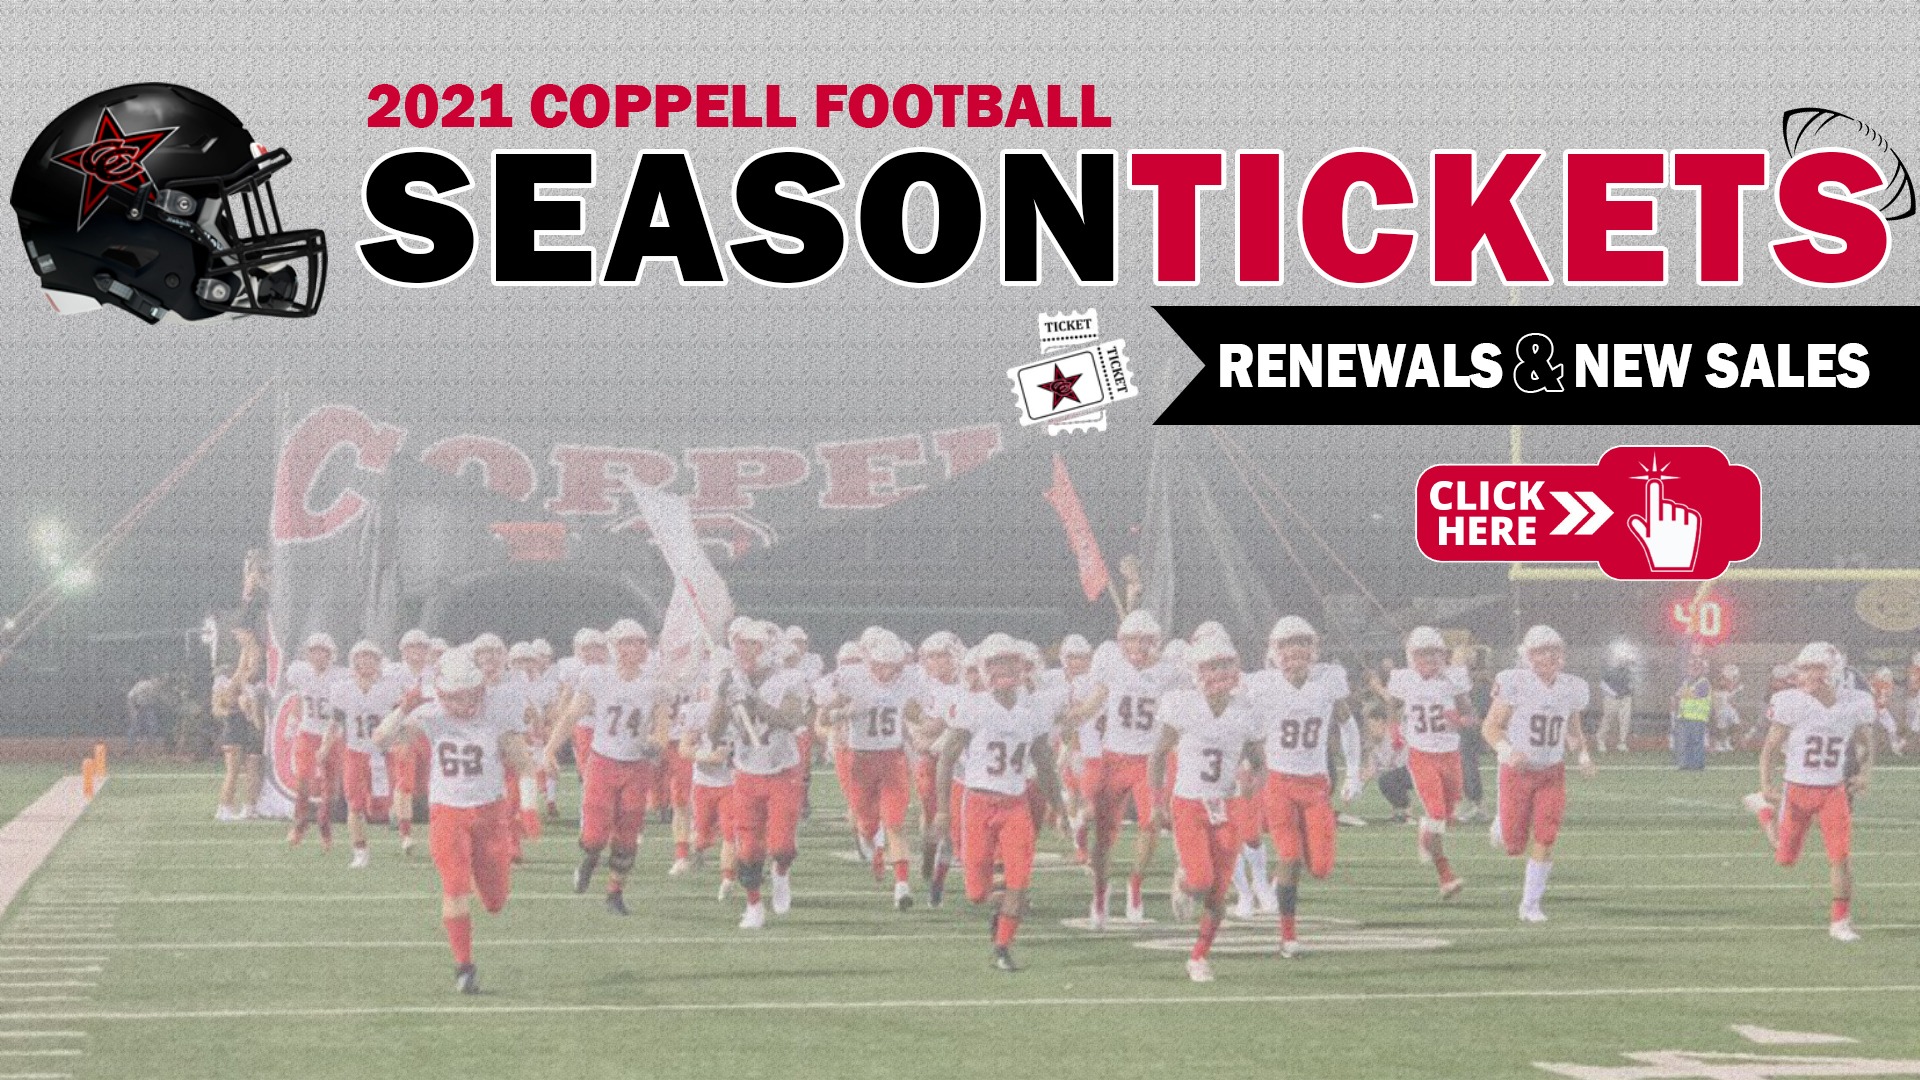 Coppell High School (Coppell, TX) Athletics